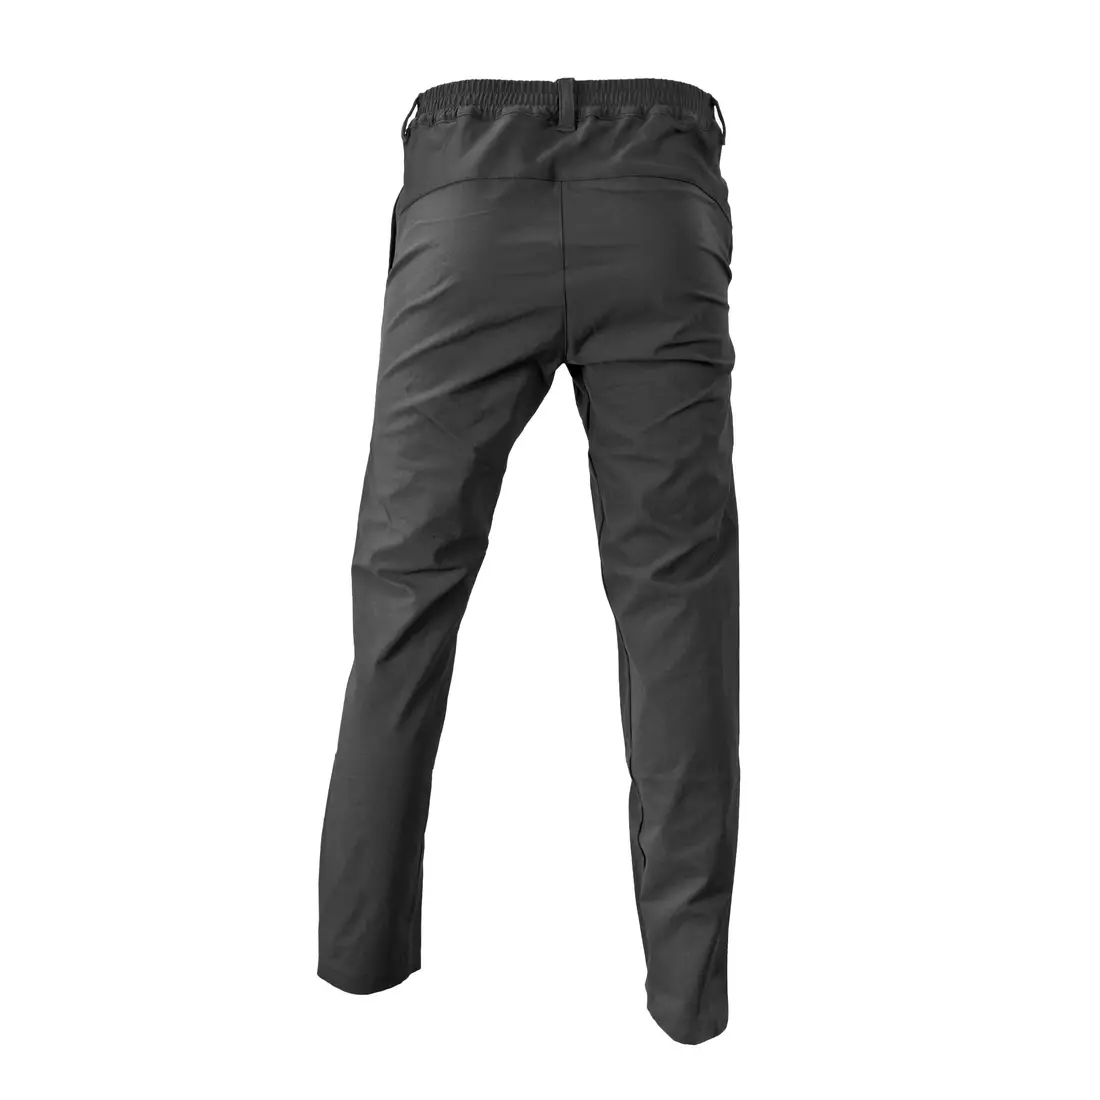 SHIMANO CWPATWLS16UL W's Insulated Comfort Pants – isolierte Radhose für Damen